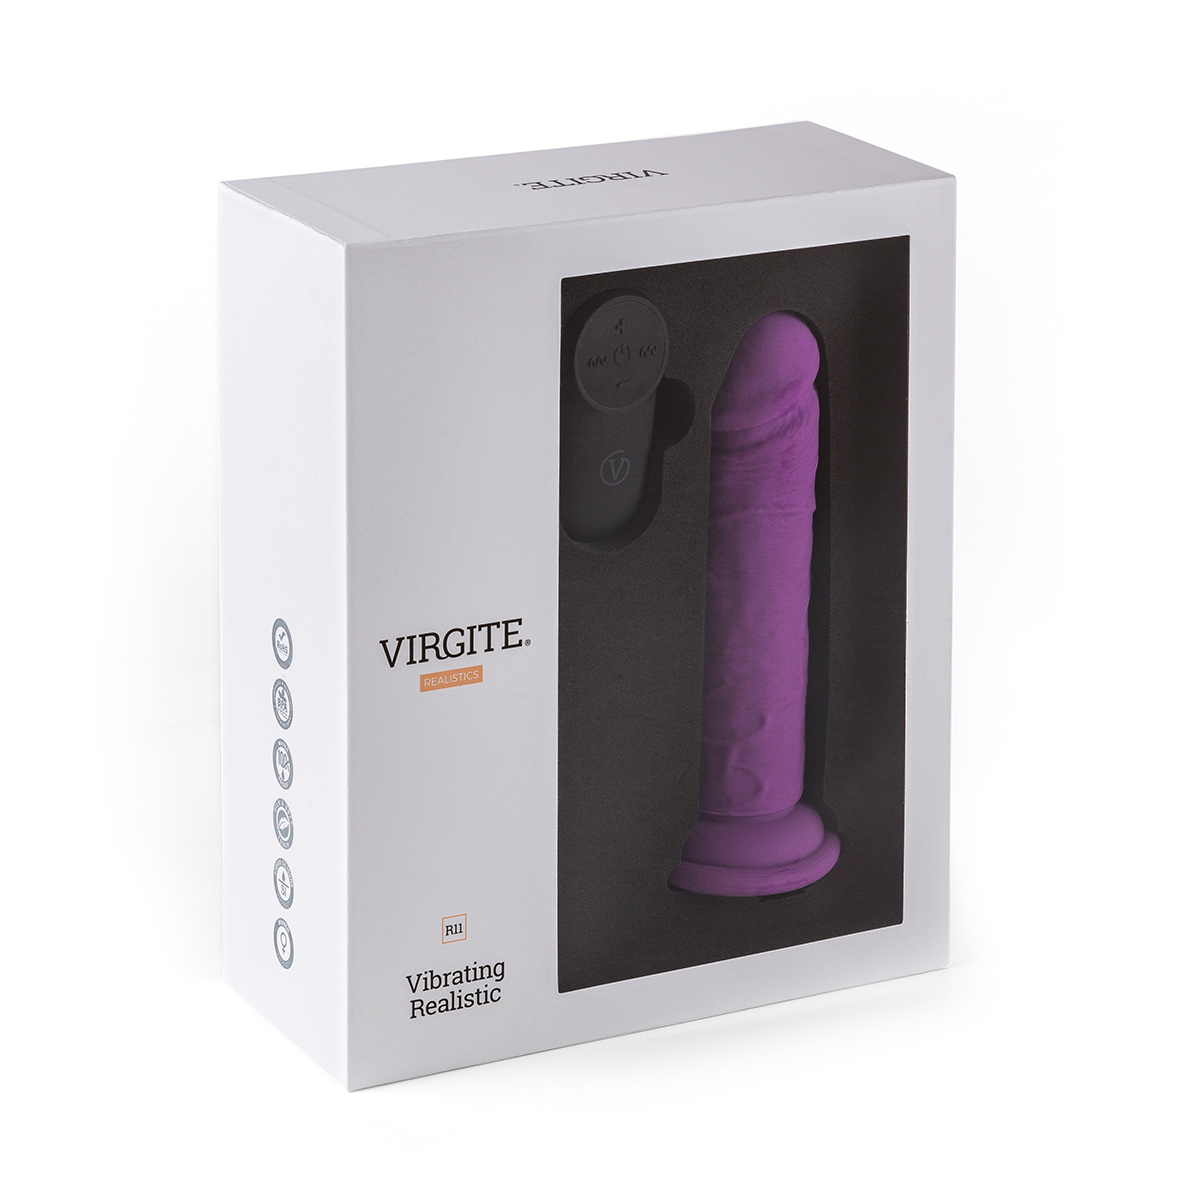 Vibrating-Realistic-with-Remote-R11-Purple-OPR-3090094-5